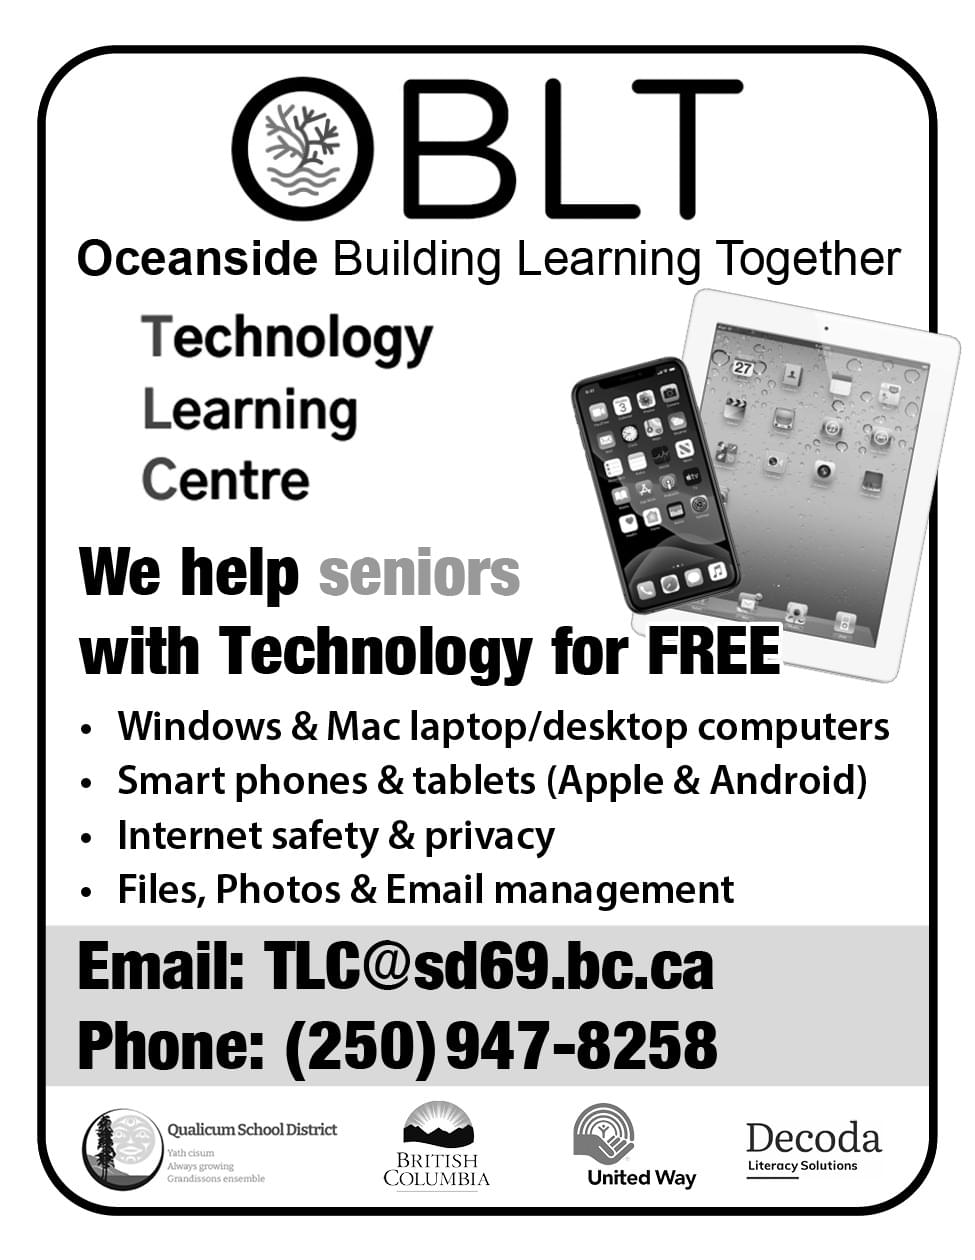 Oceanside Building Learning Together helping seniors with technology for free Ad in Coffee News